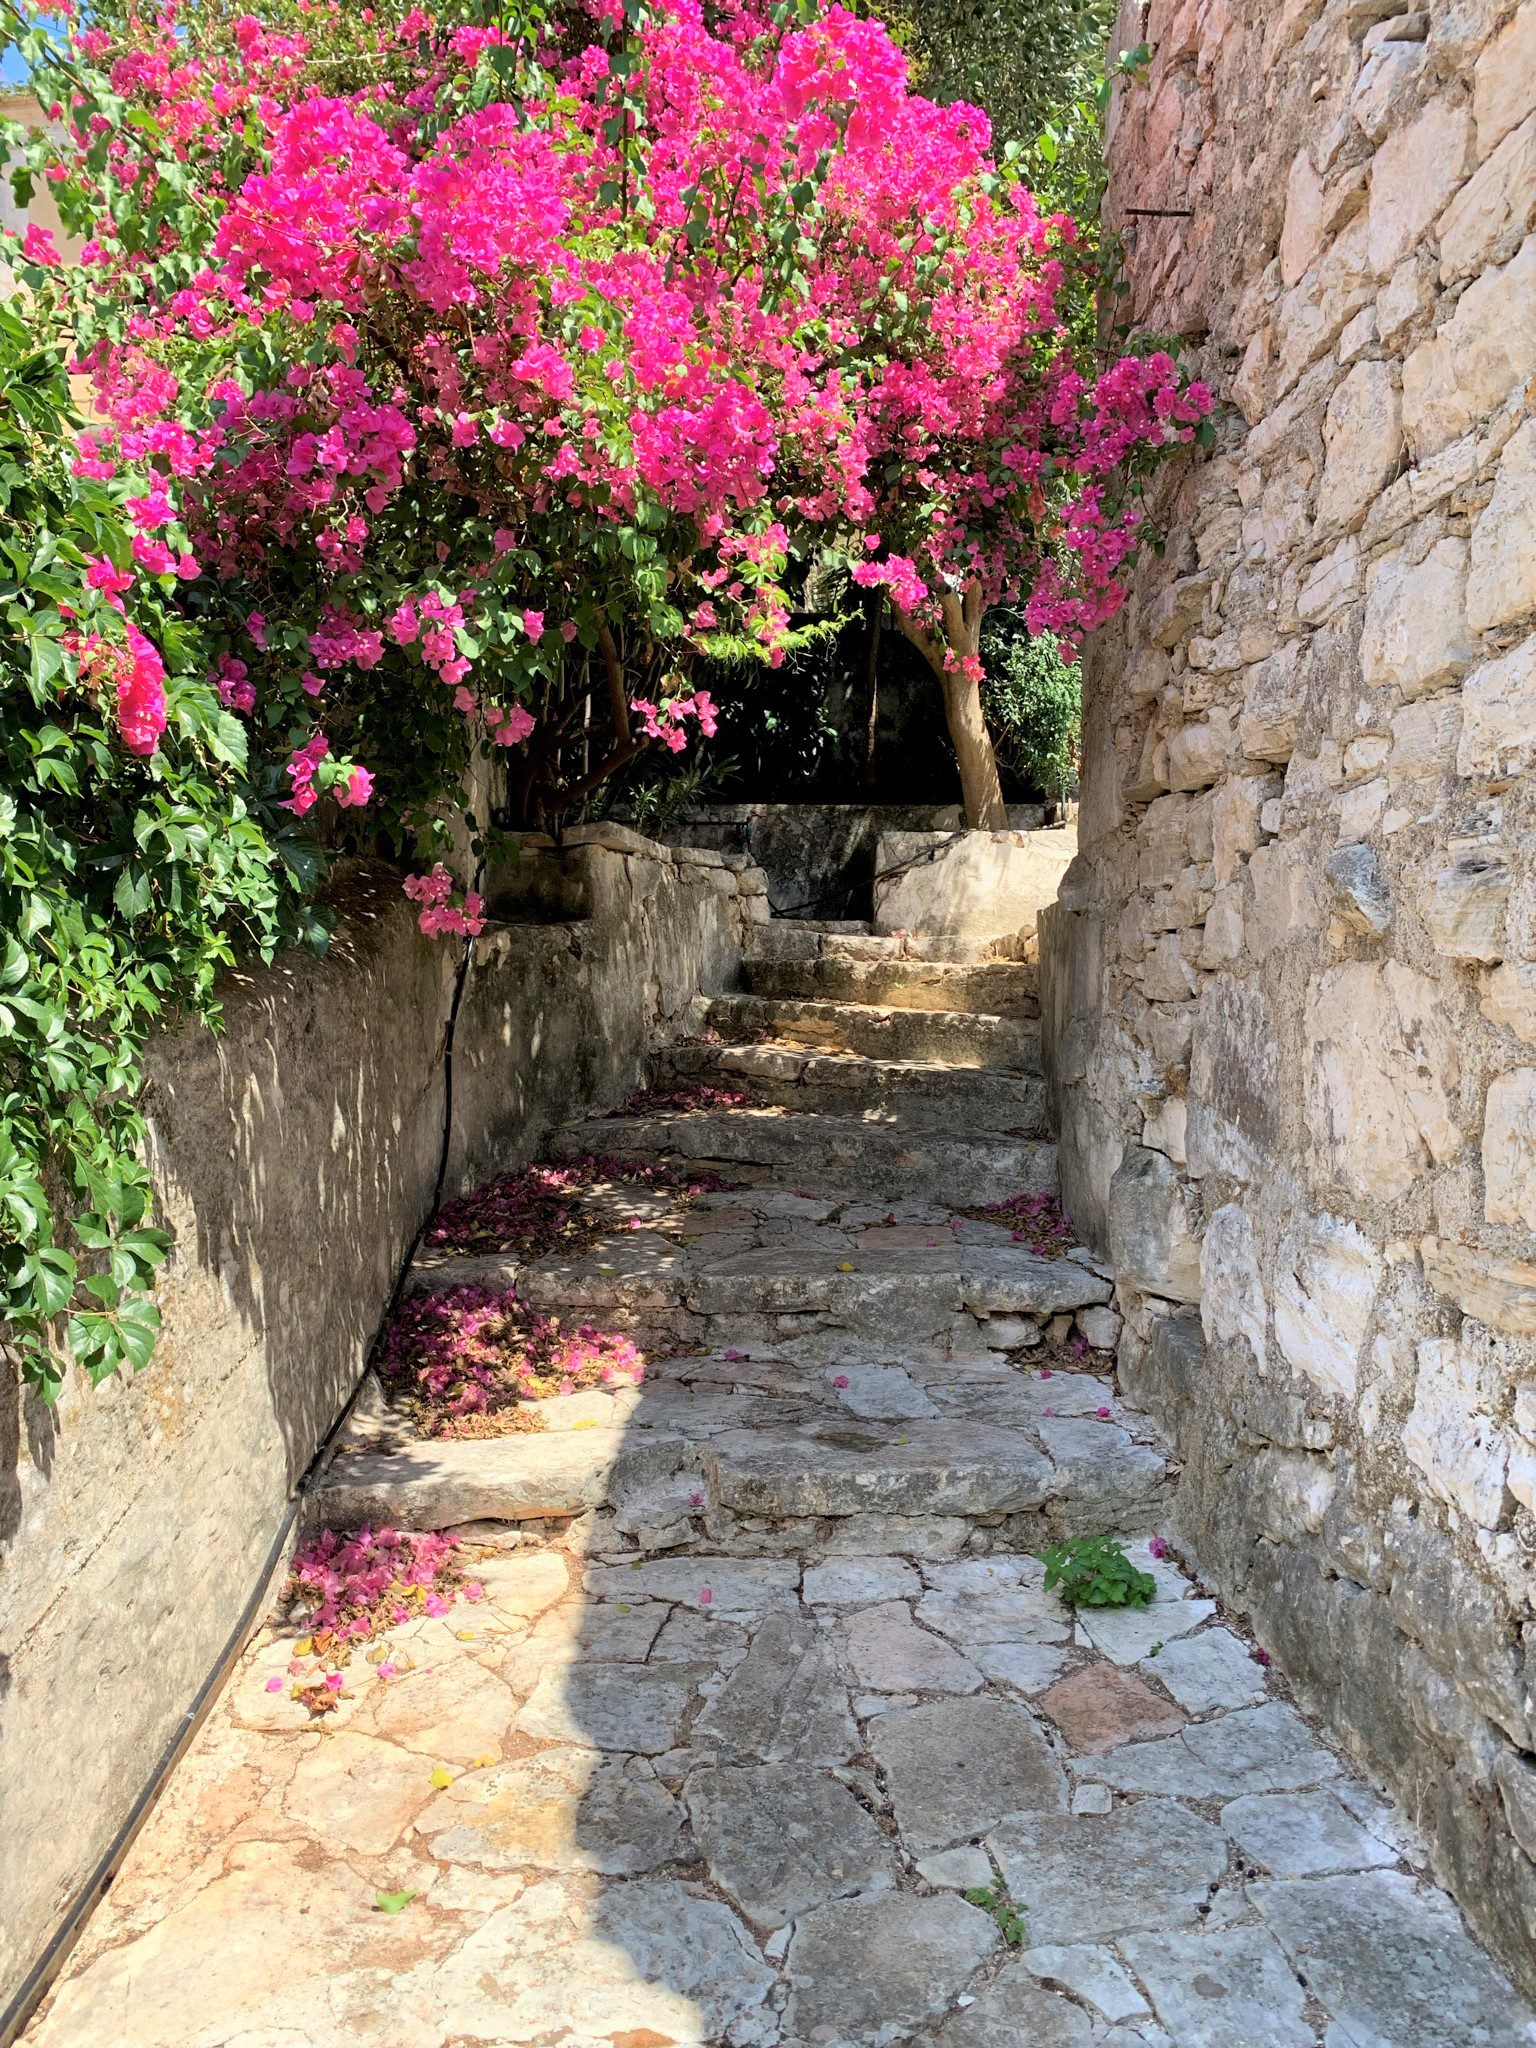 Public footpath to ruin for sale in Ithaca Greece, Vathi